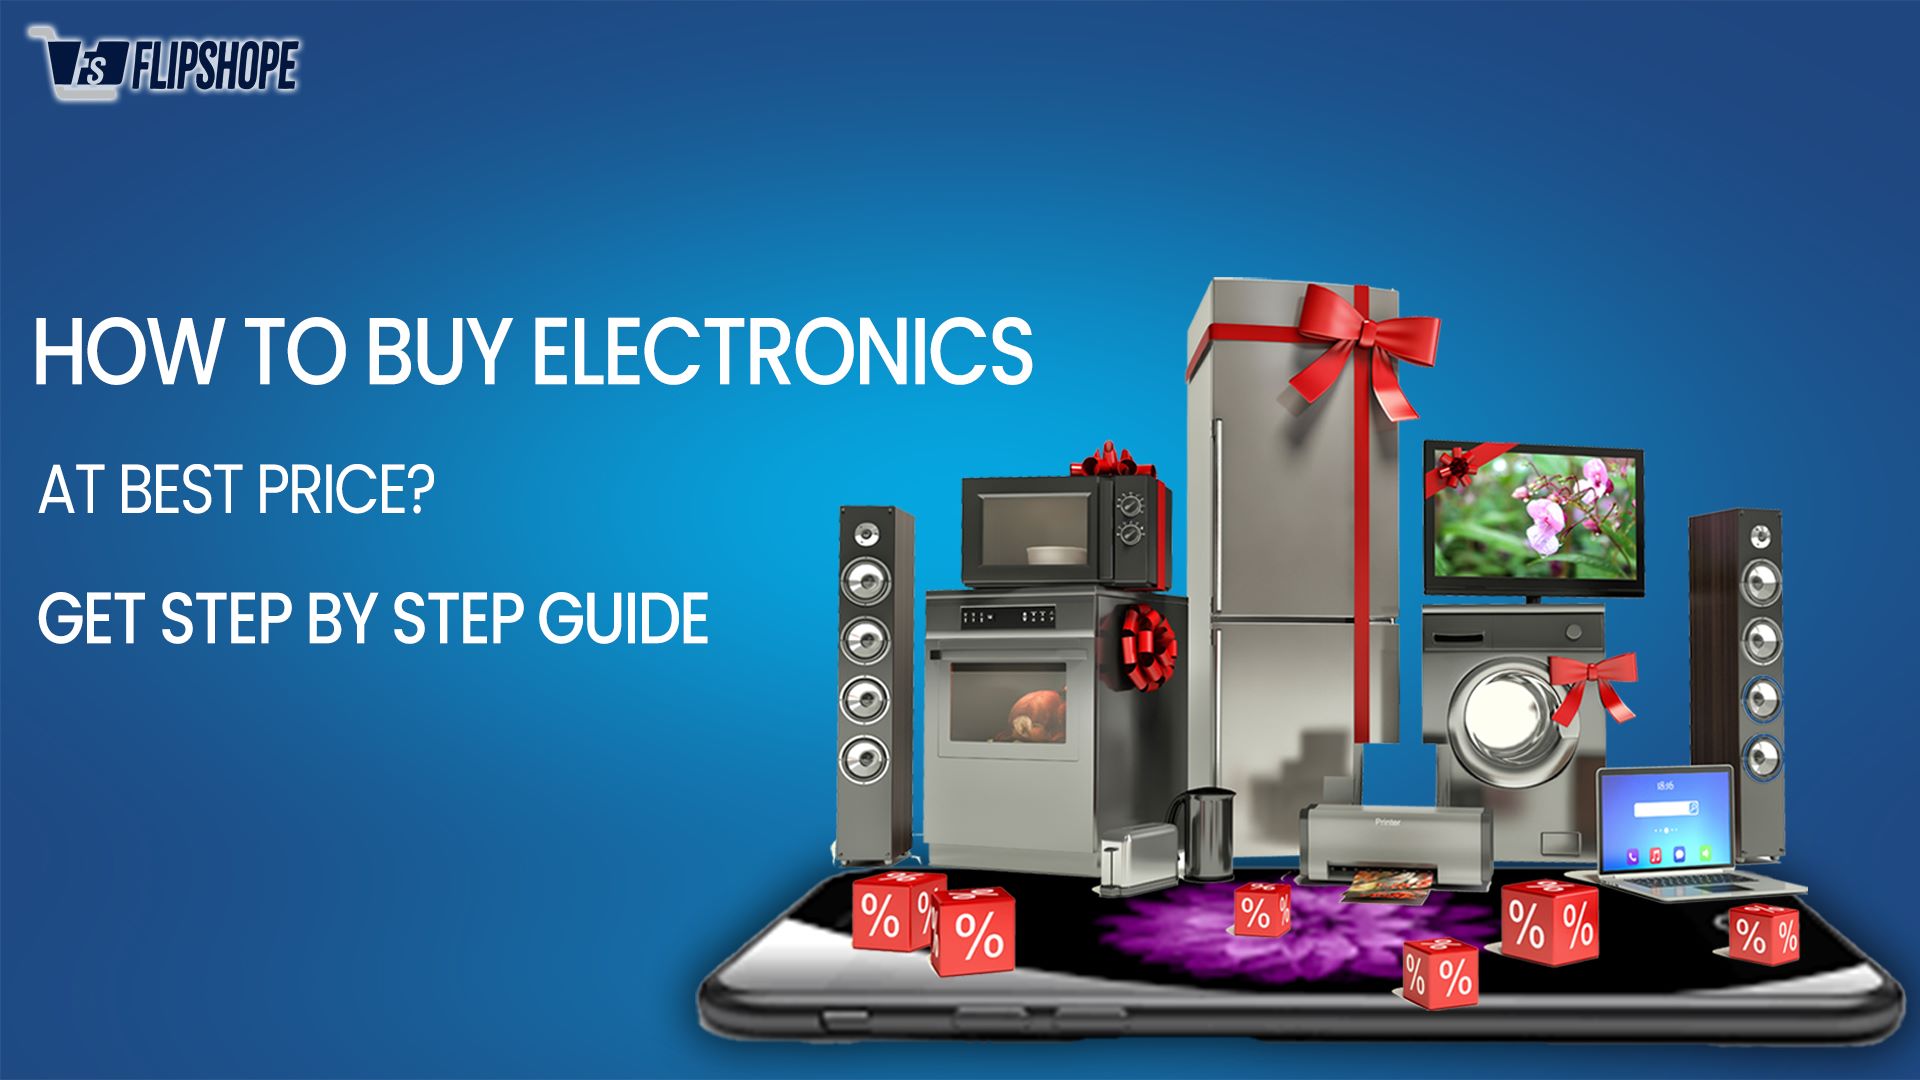 How to Buy Electronics at the best prices